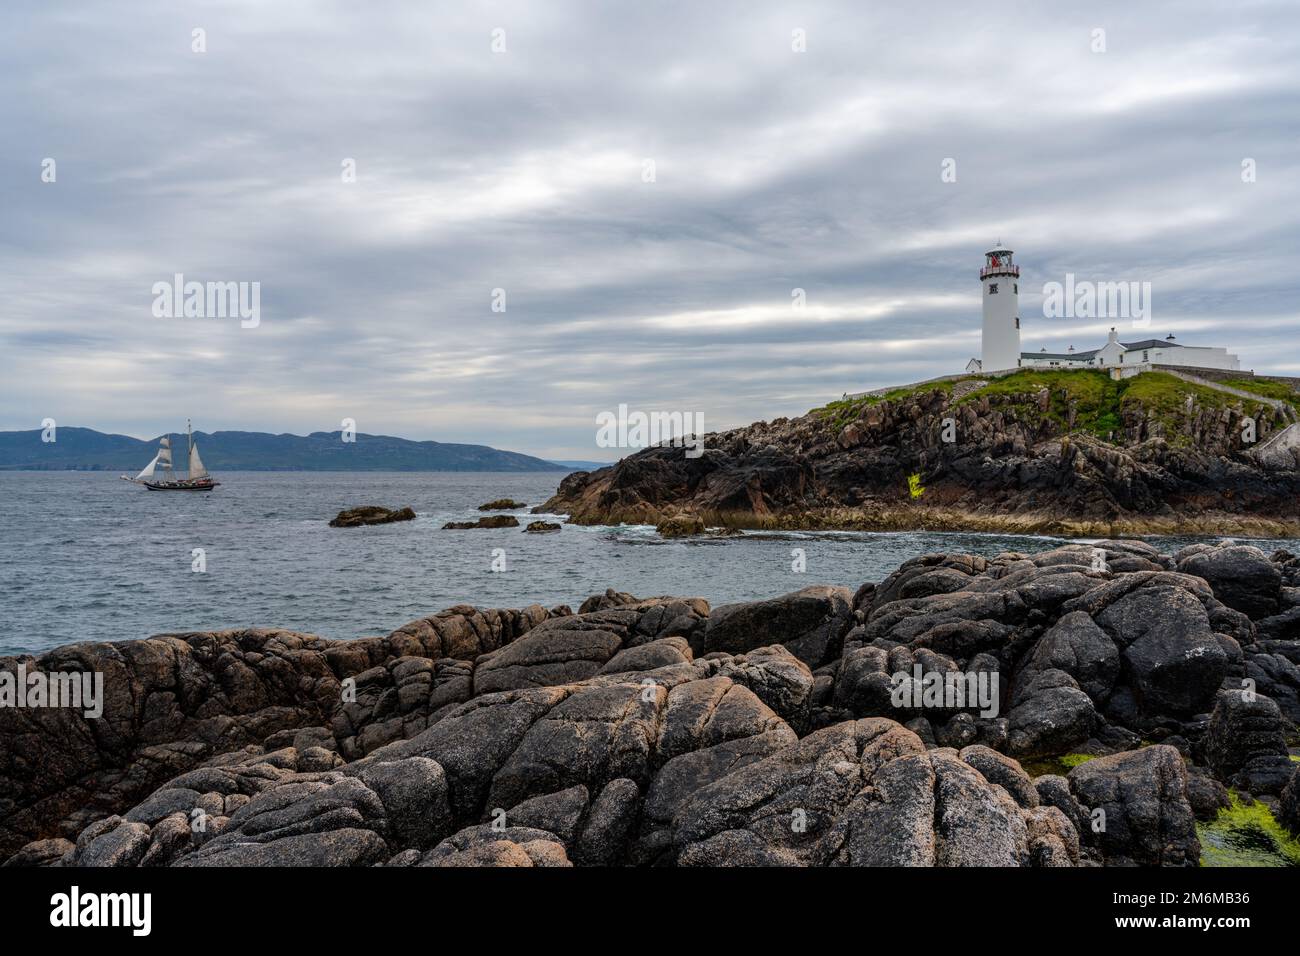 A view of the Fanad Head Lighthouse on the northern coast of Ireland with an old two-masted sailboat Stock Photo